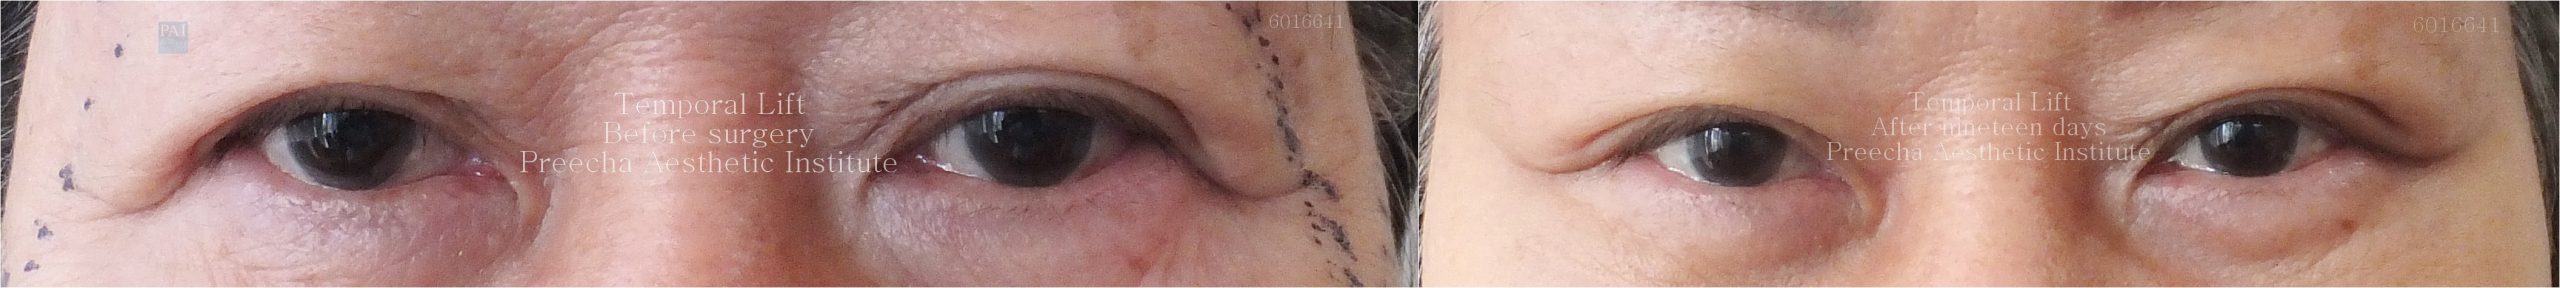 Temporal lift before and after 19 days surgery preecha aesthetic institute